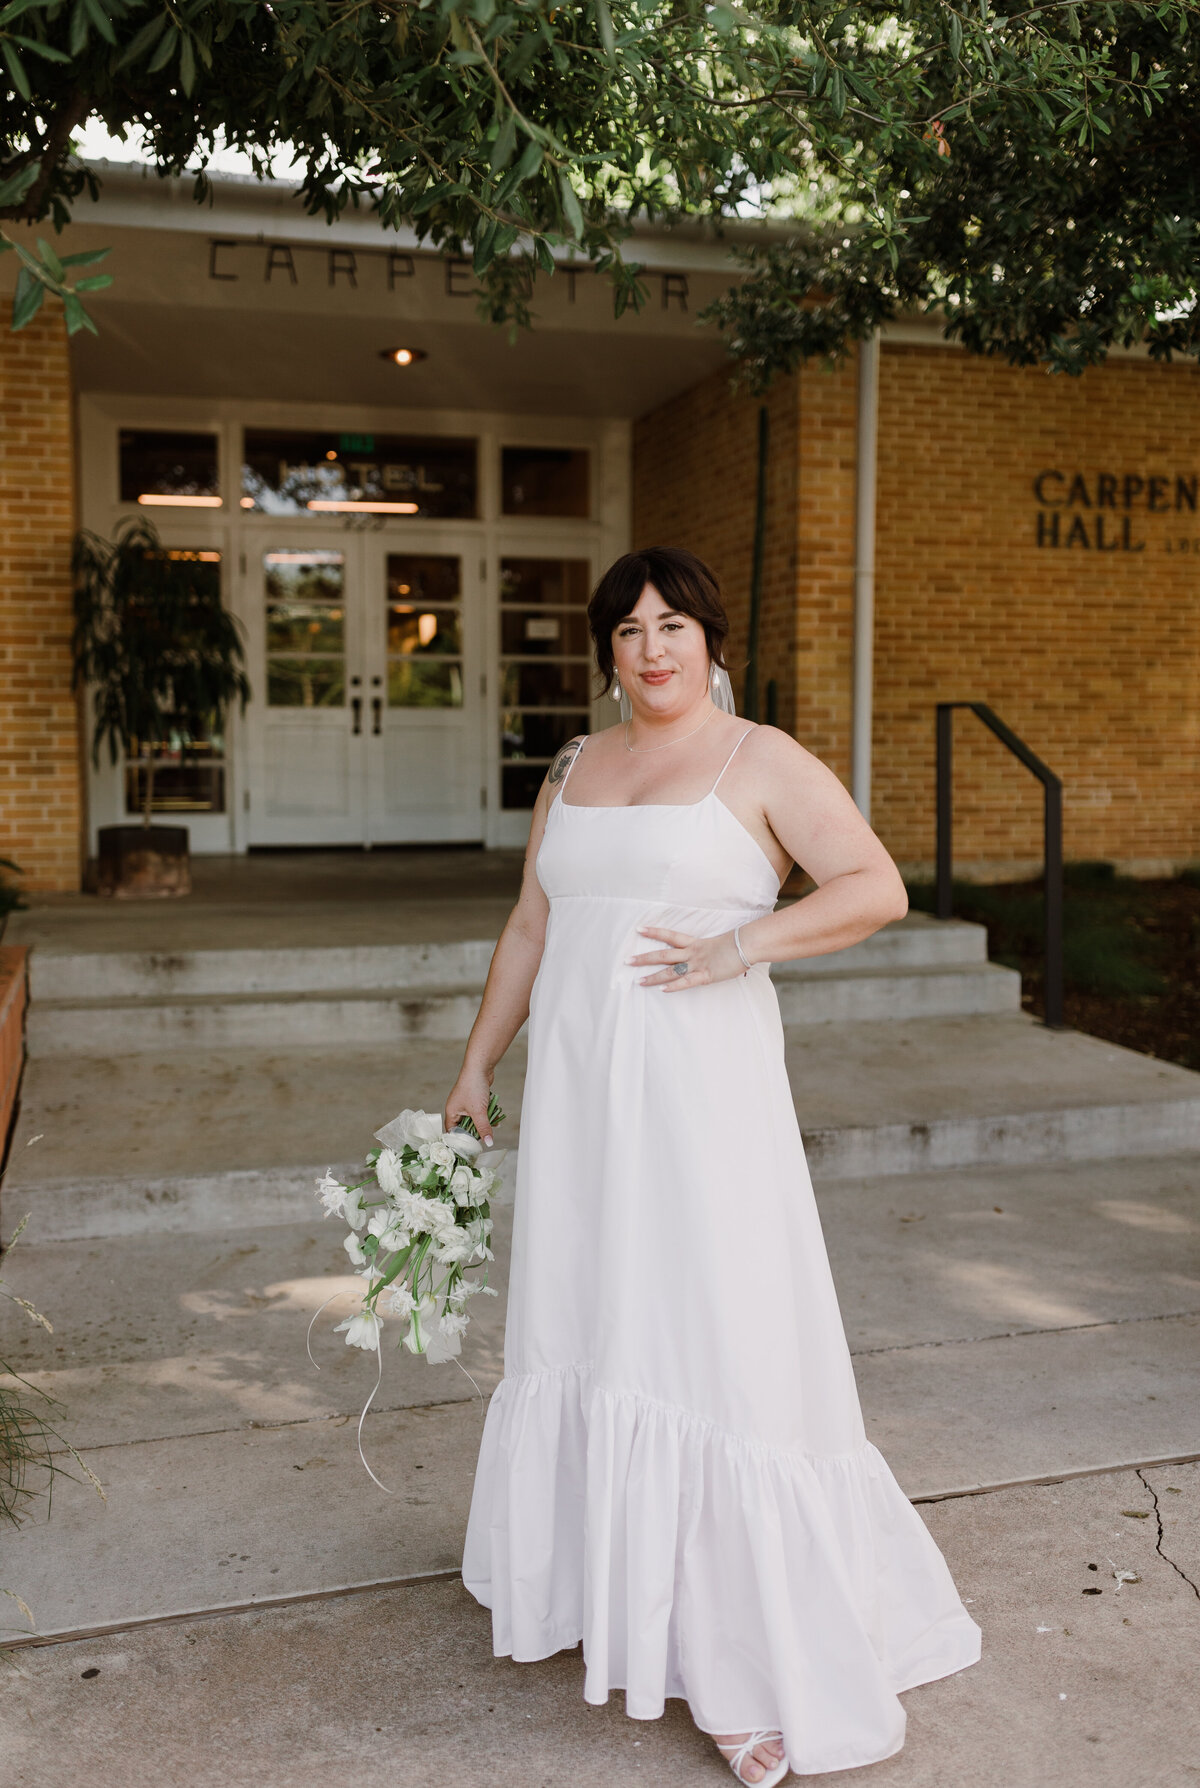 Bride standing outside the Bride and groom portraits at  Carpenter Hotel, Austin